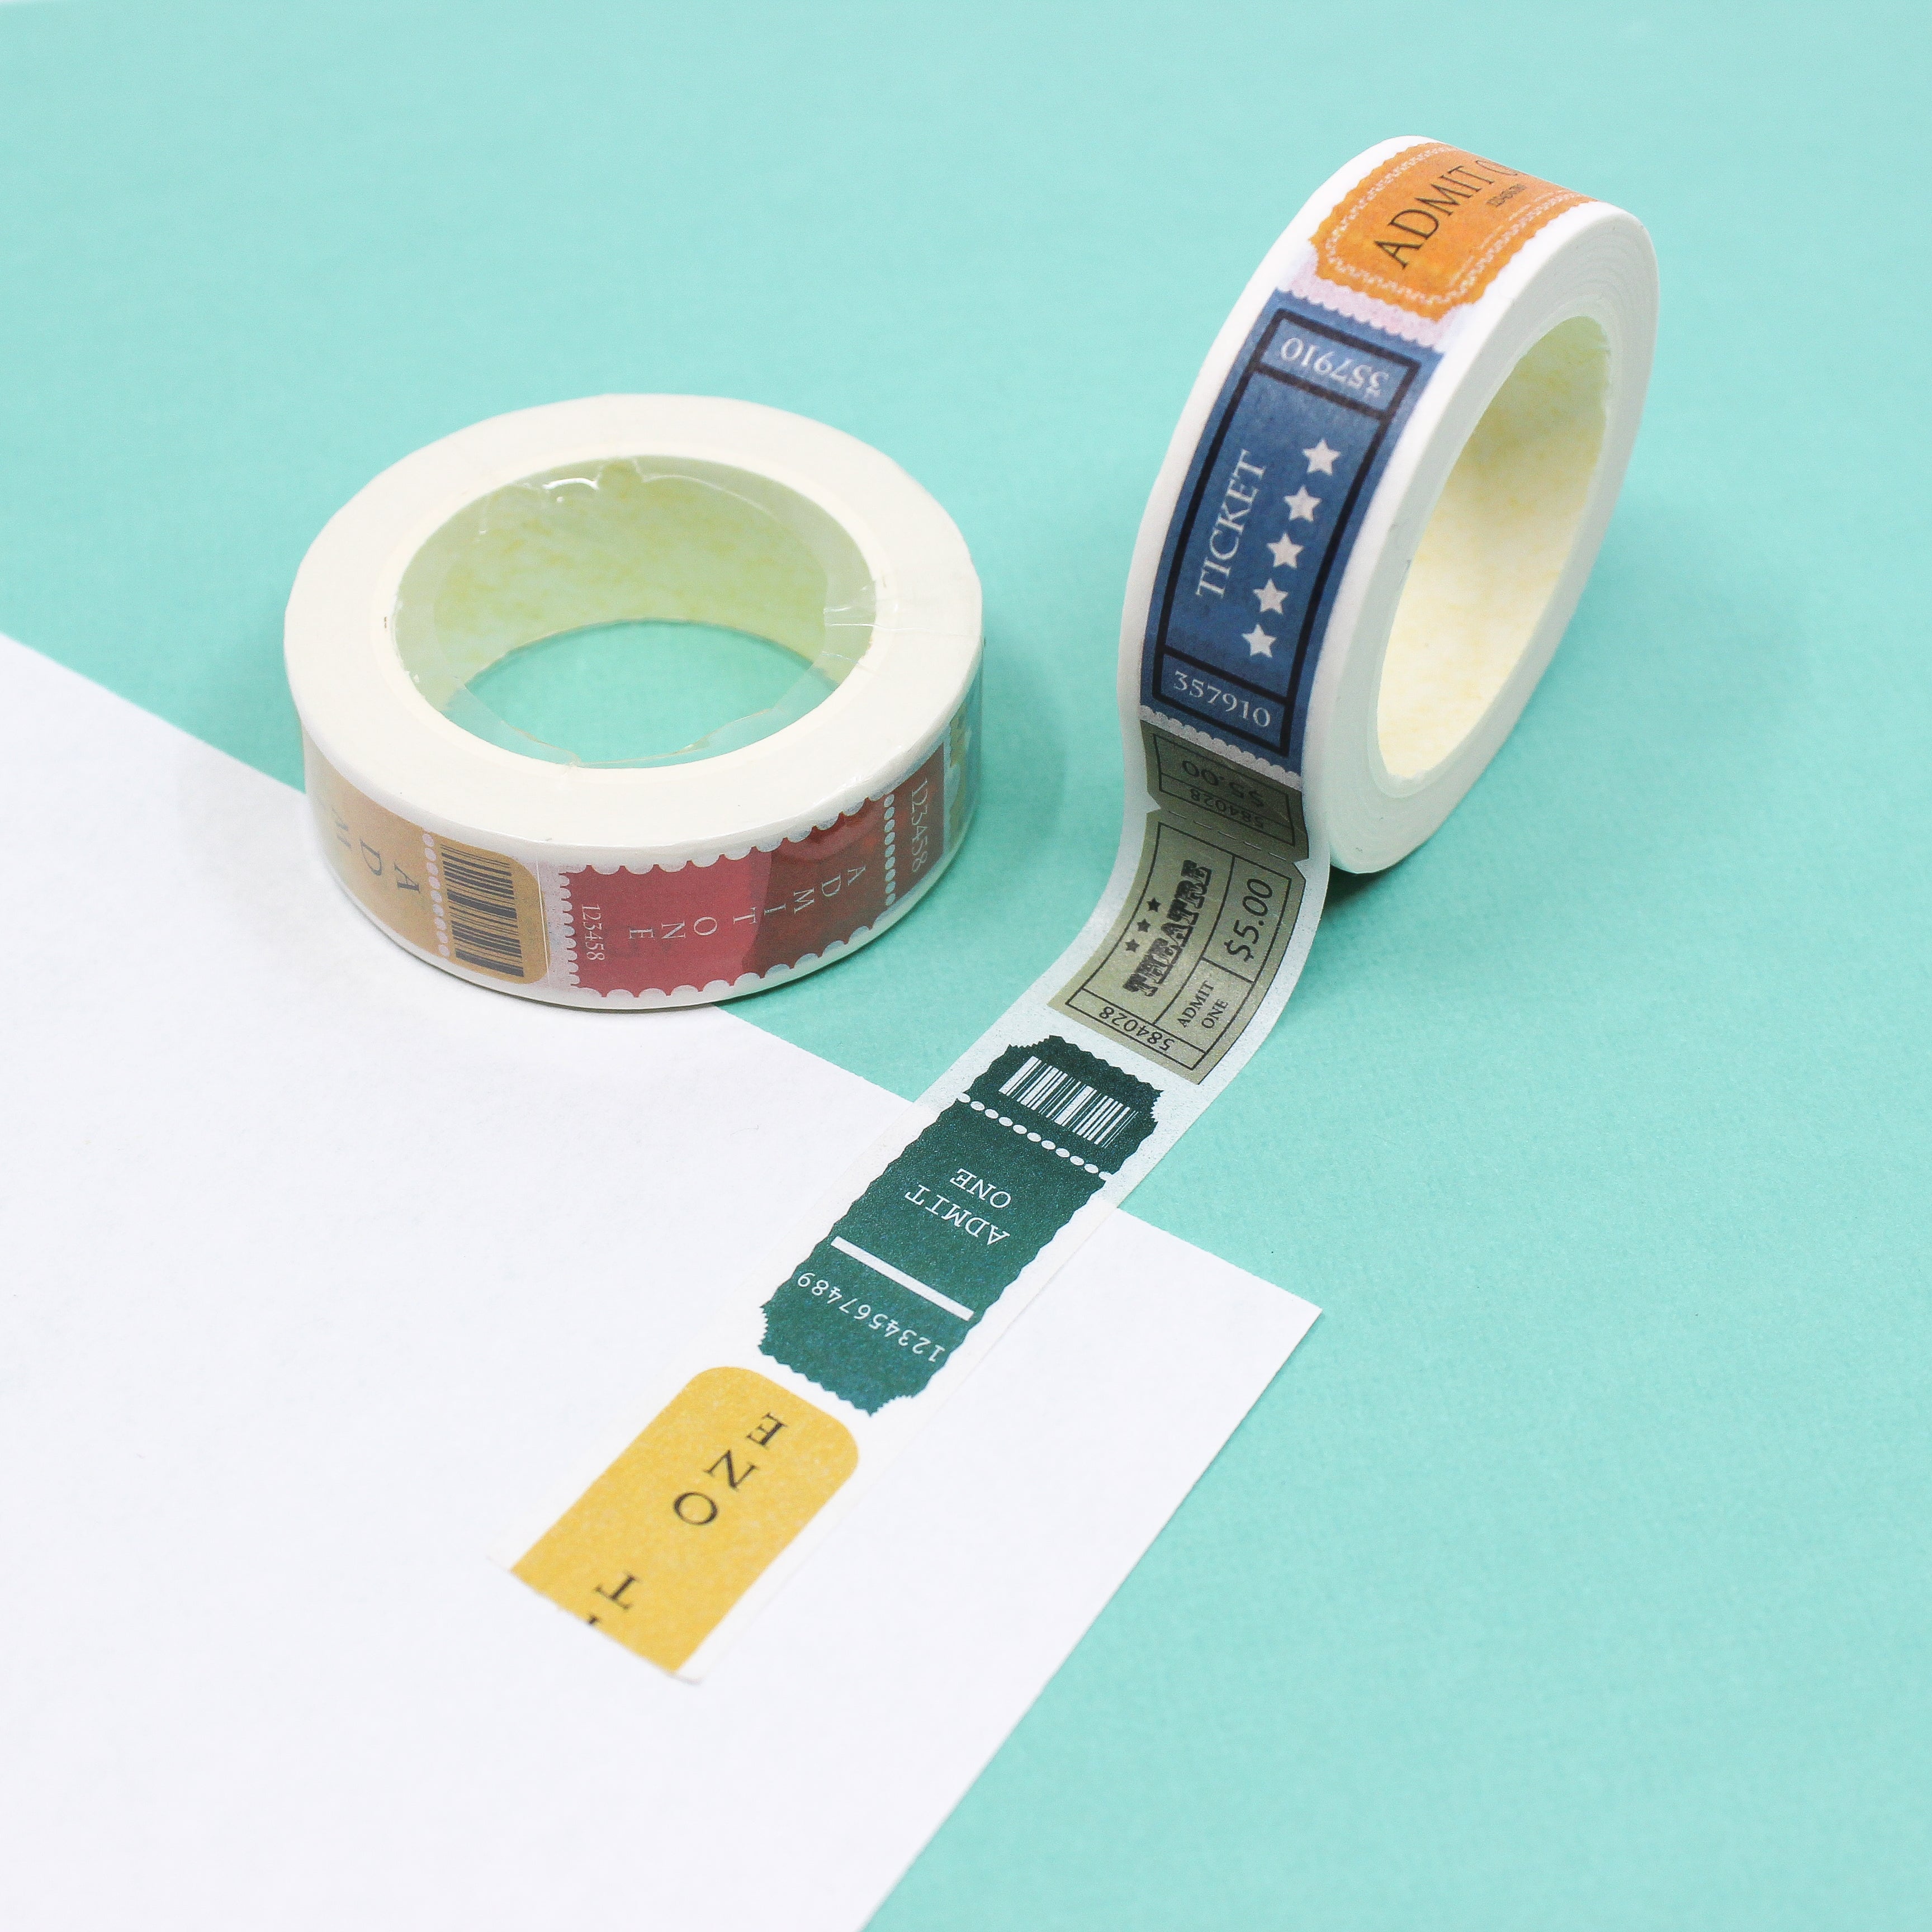 This is a colorful cinema tickets themed washi tape from BBB Supplies Craft Shop